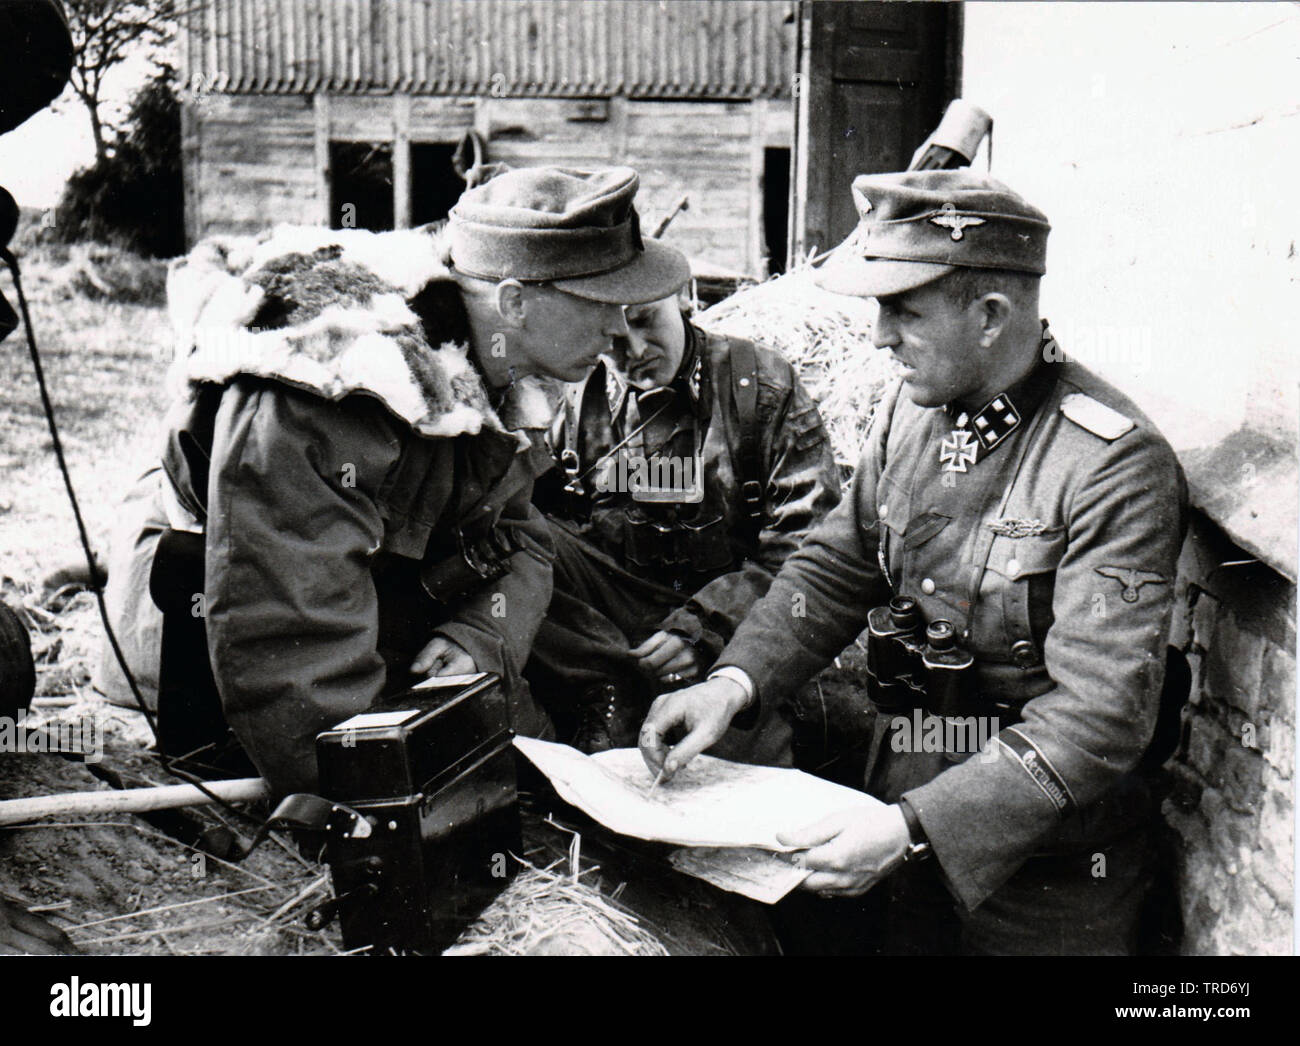 Waffen SS Officer Hans Dorr from the 5th SS Panzer Division Wiking issues orders to junior Officers 1944 9n he Russian Front Stock Photo